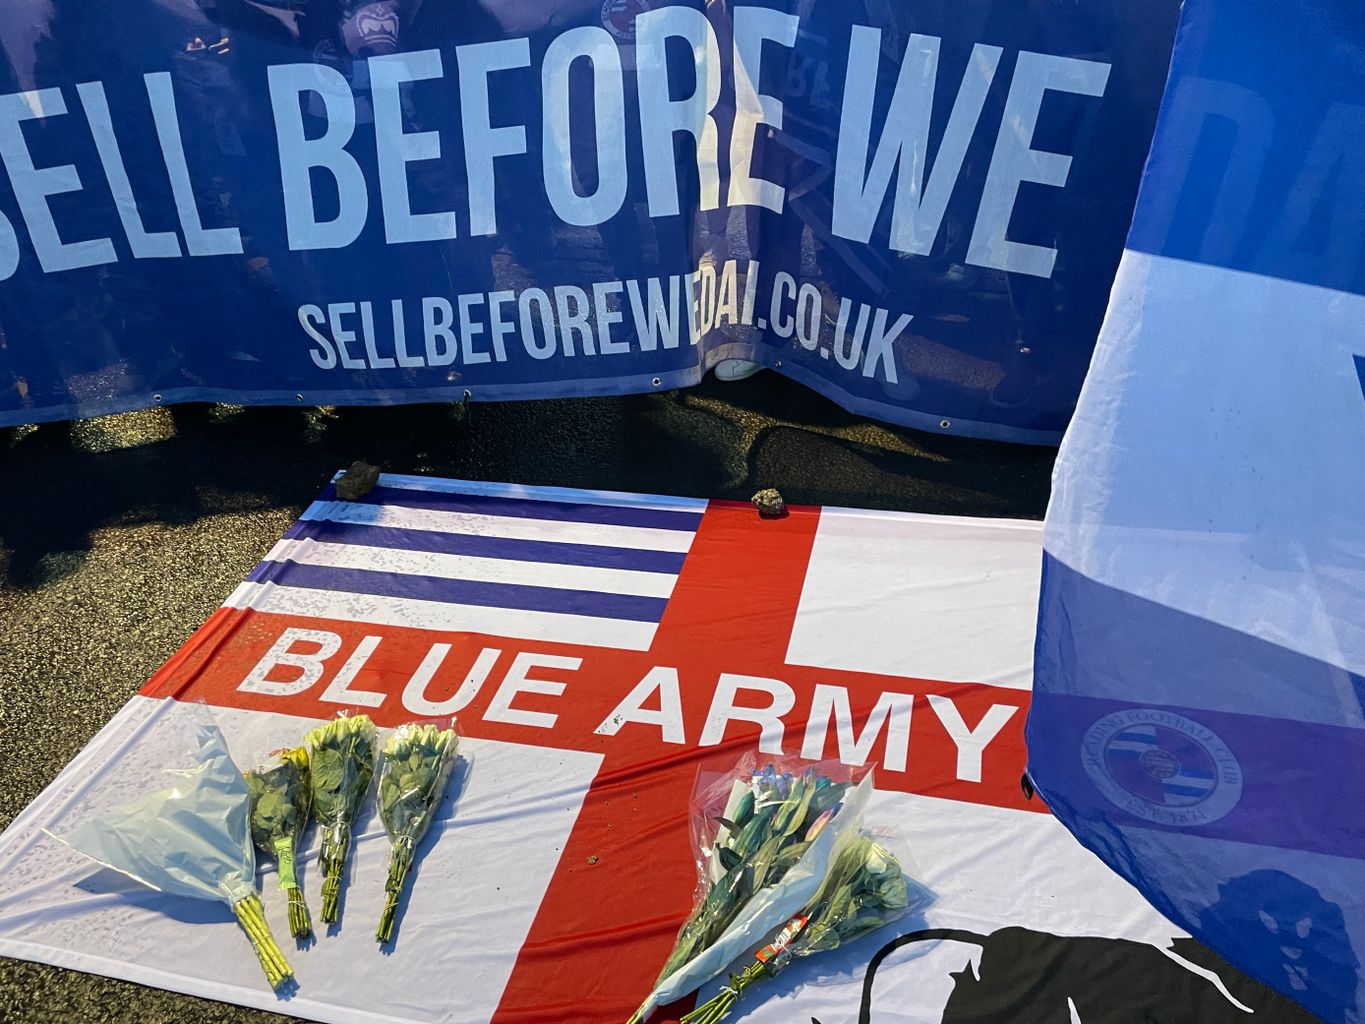 Flowers, flags and banners led down in opposition to the potential sale of Reading FC's training grounds